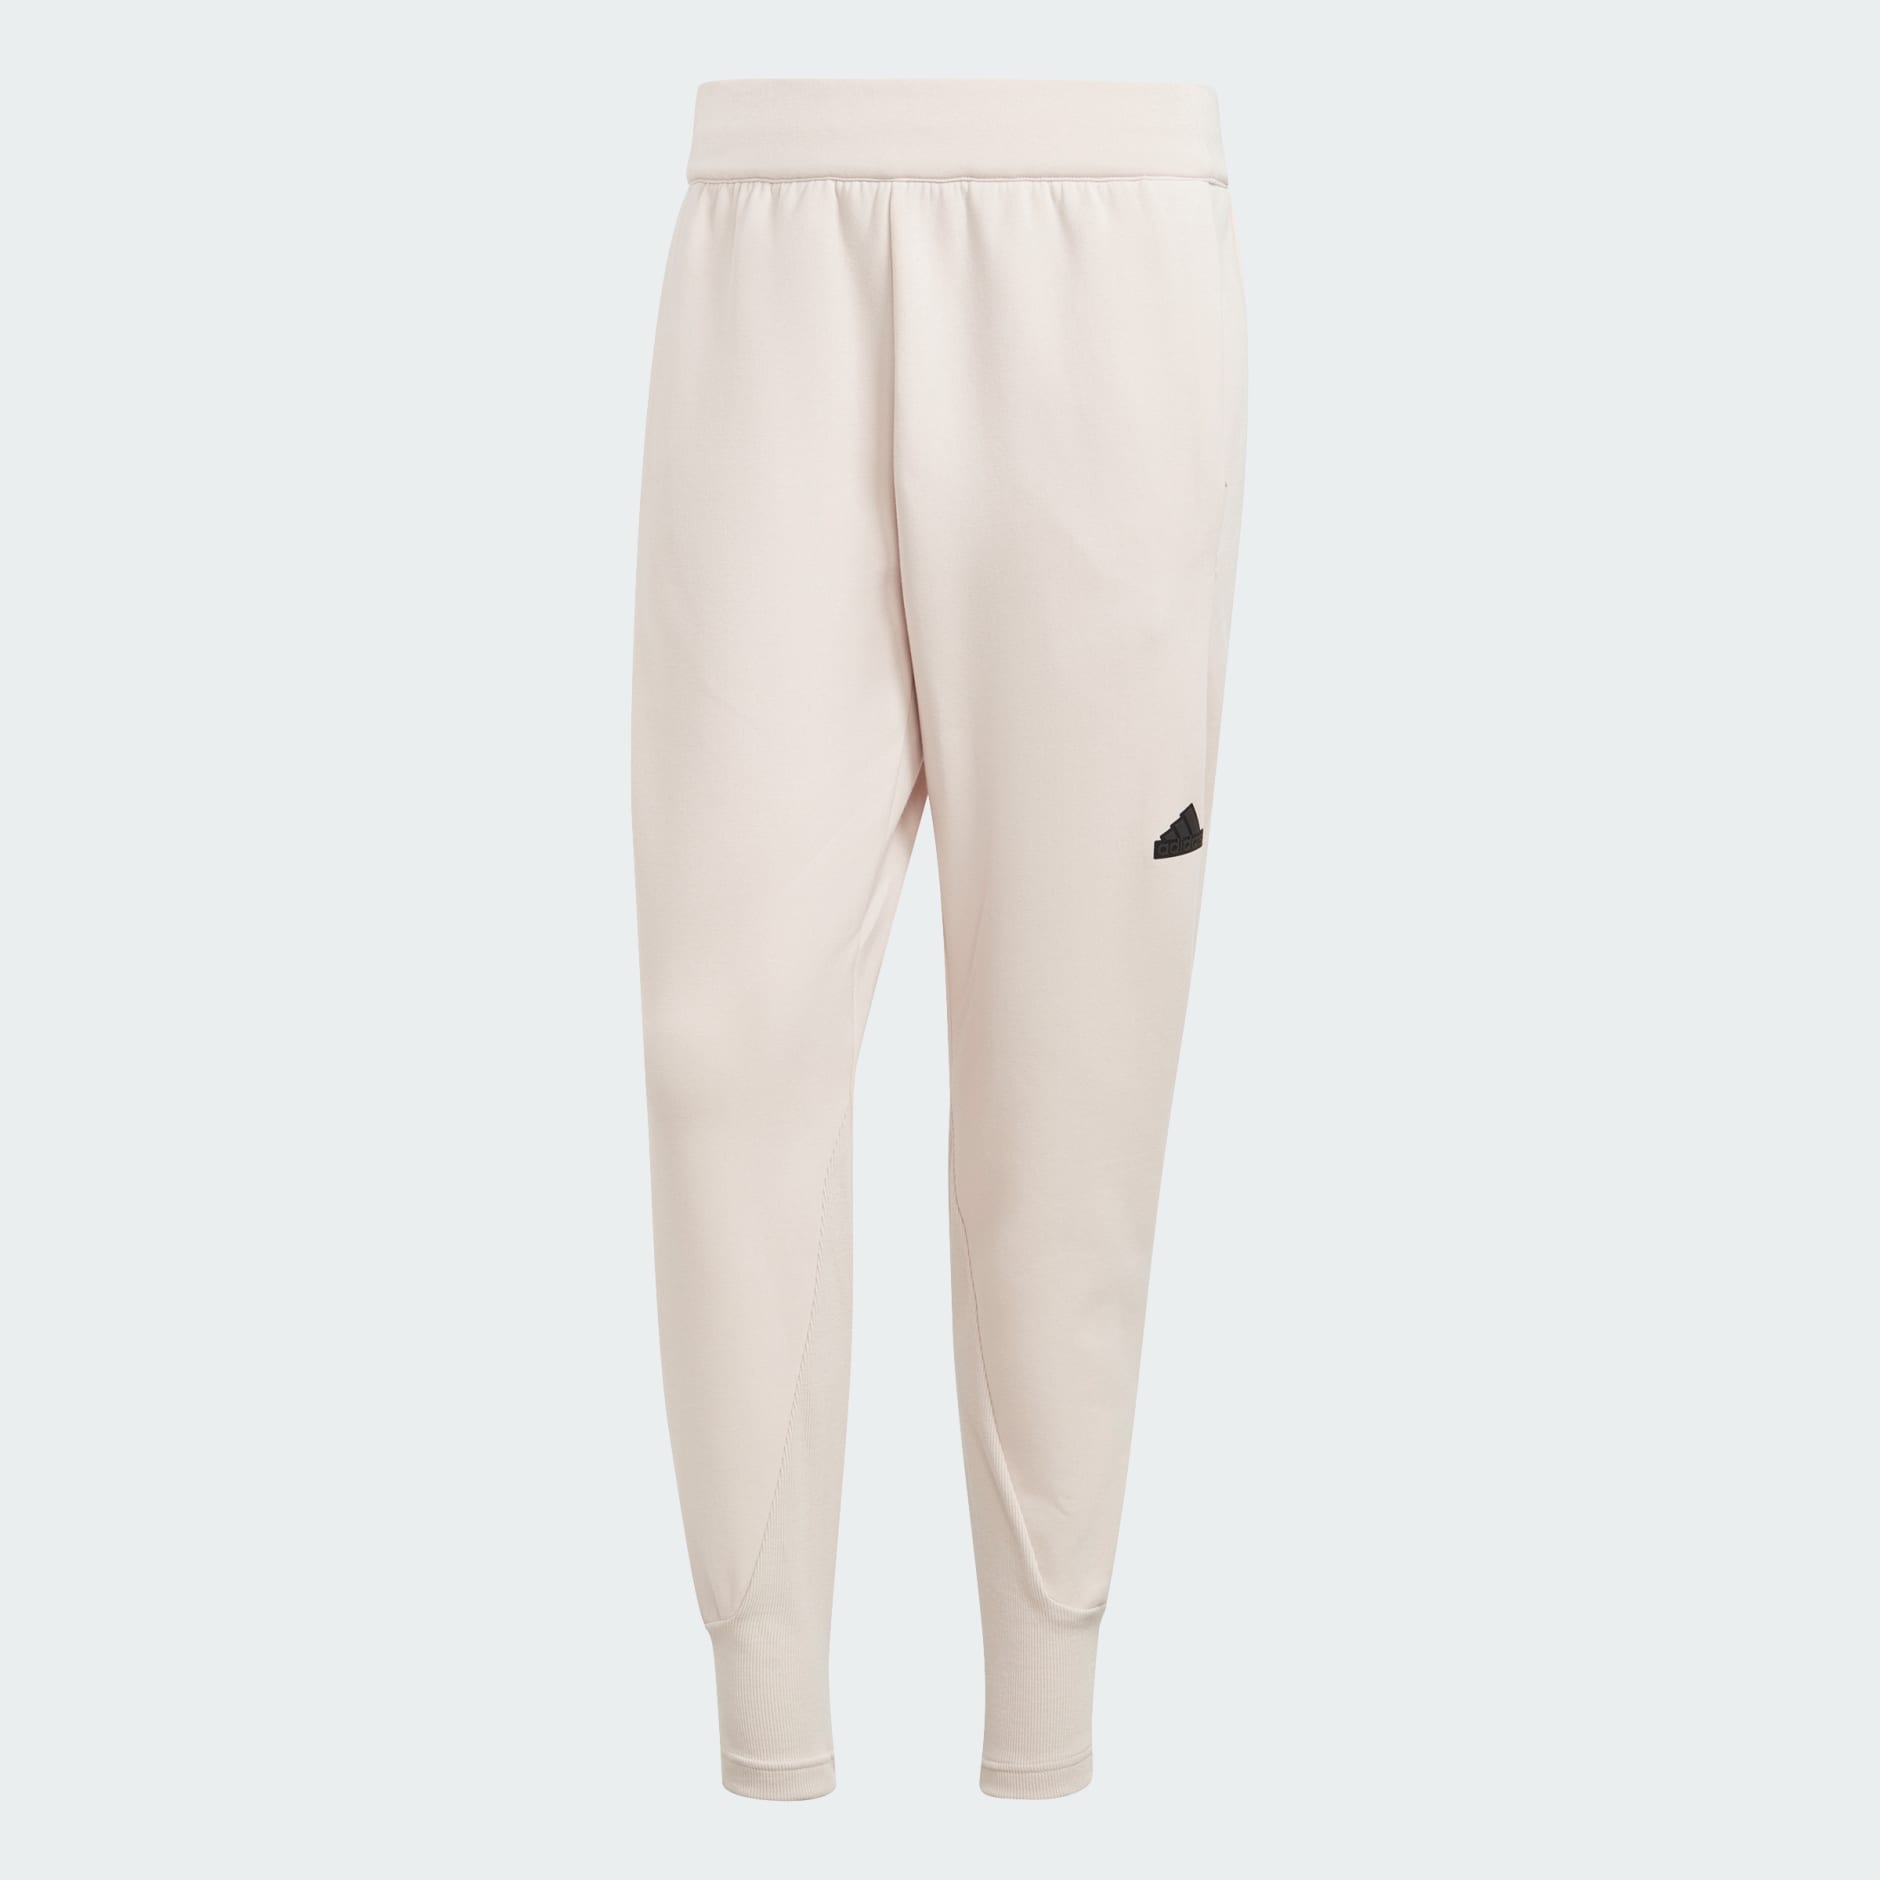 Clothing - Z.N.E. Premium Pants - Pink | adidas South Africa